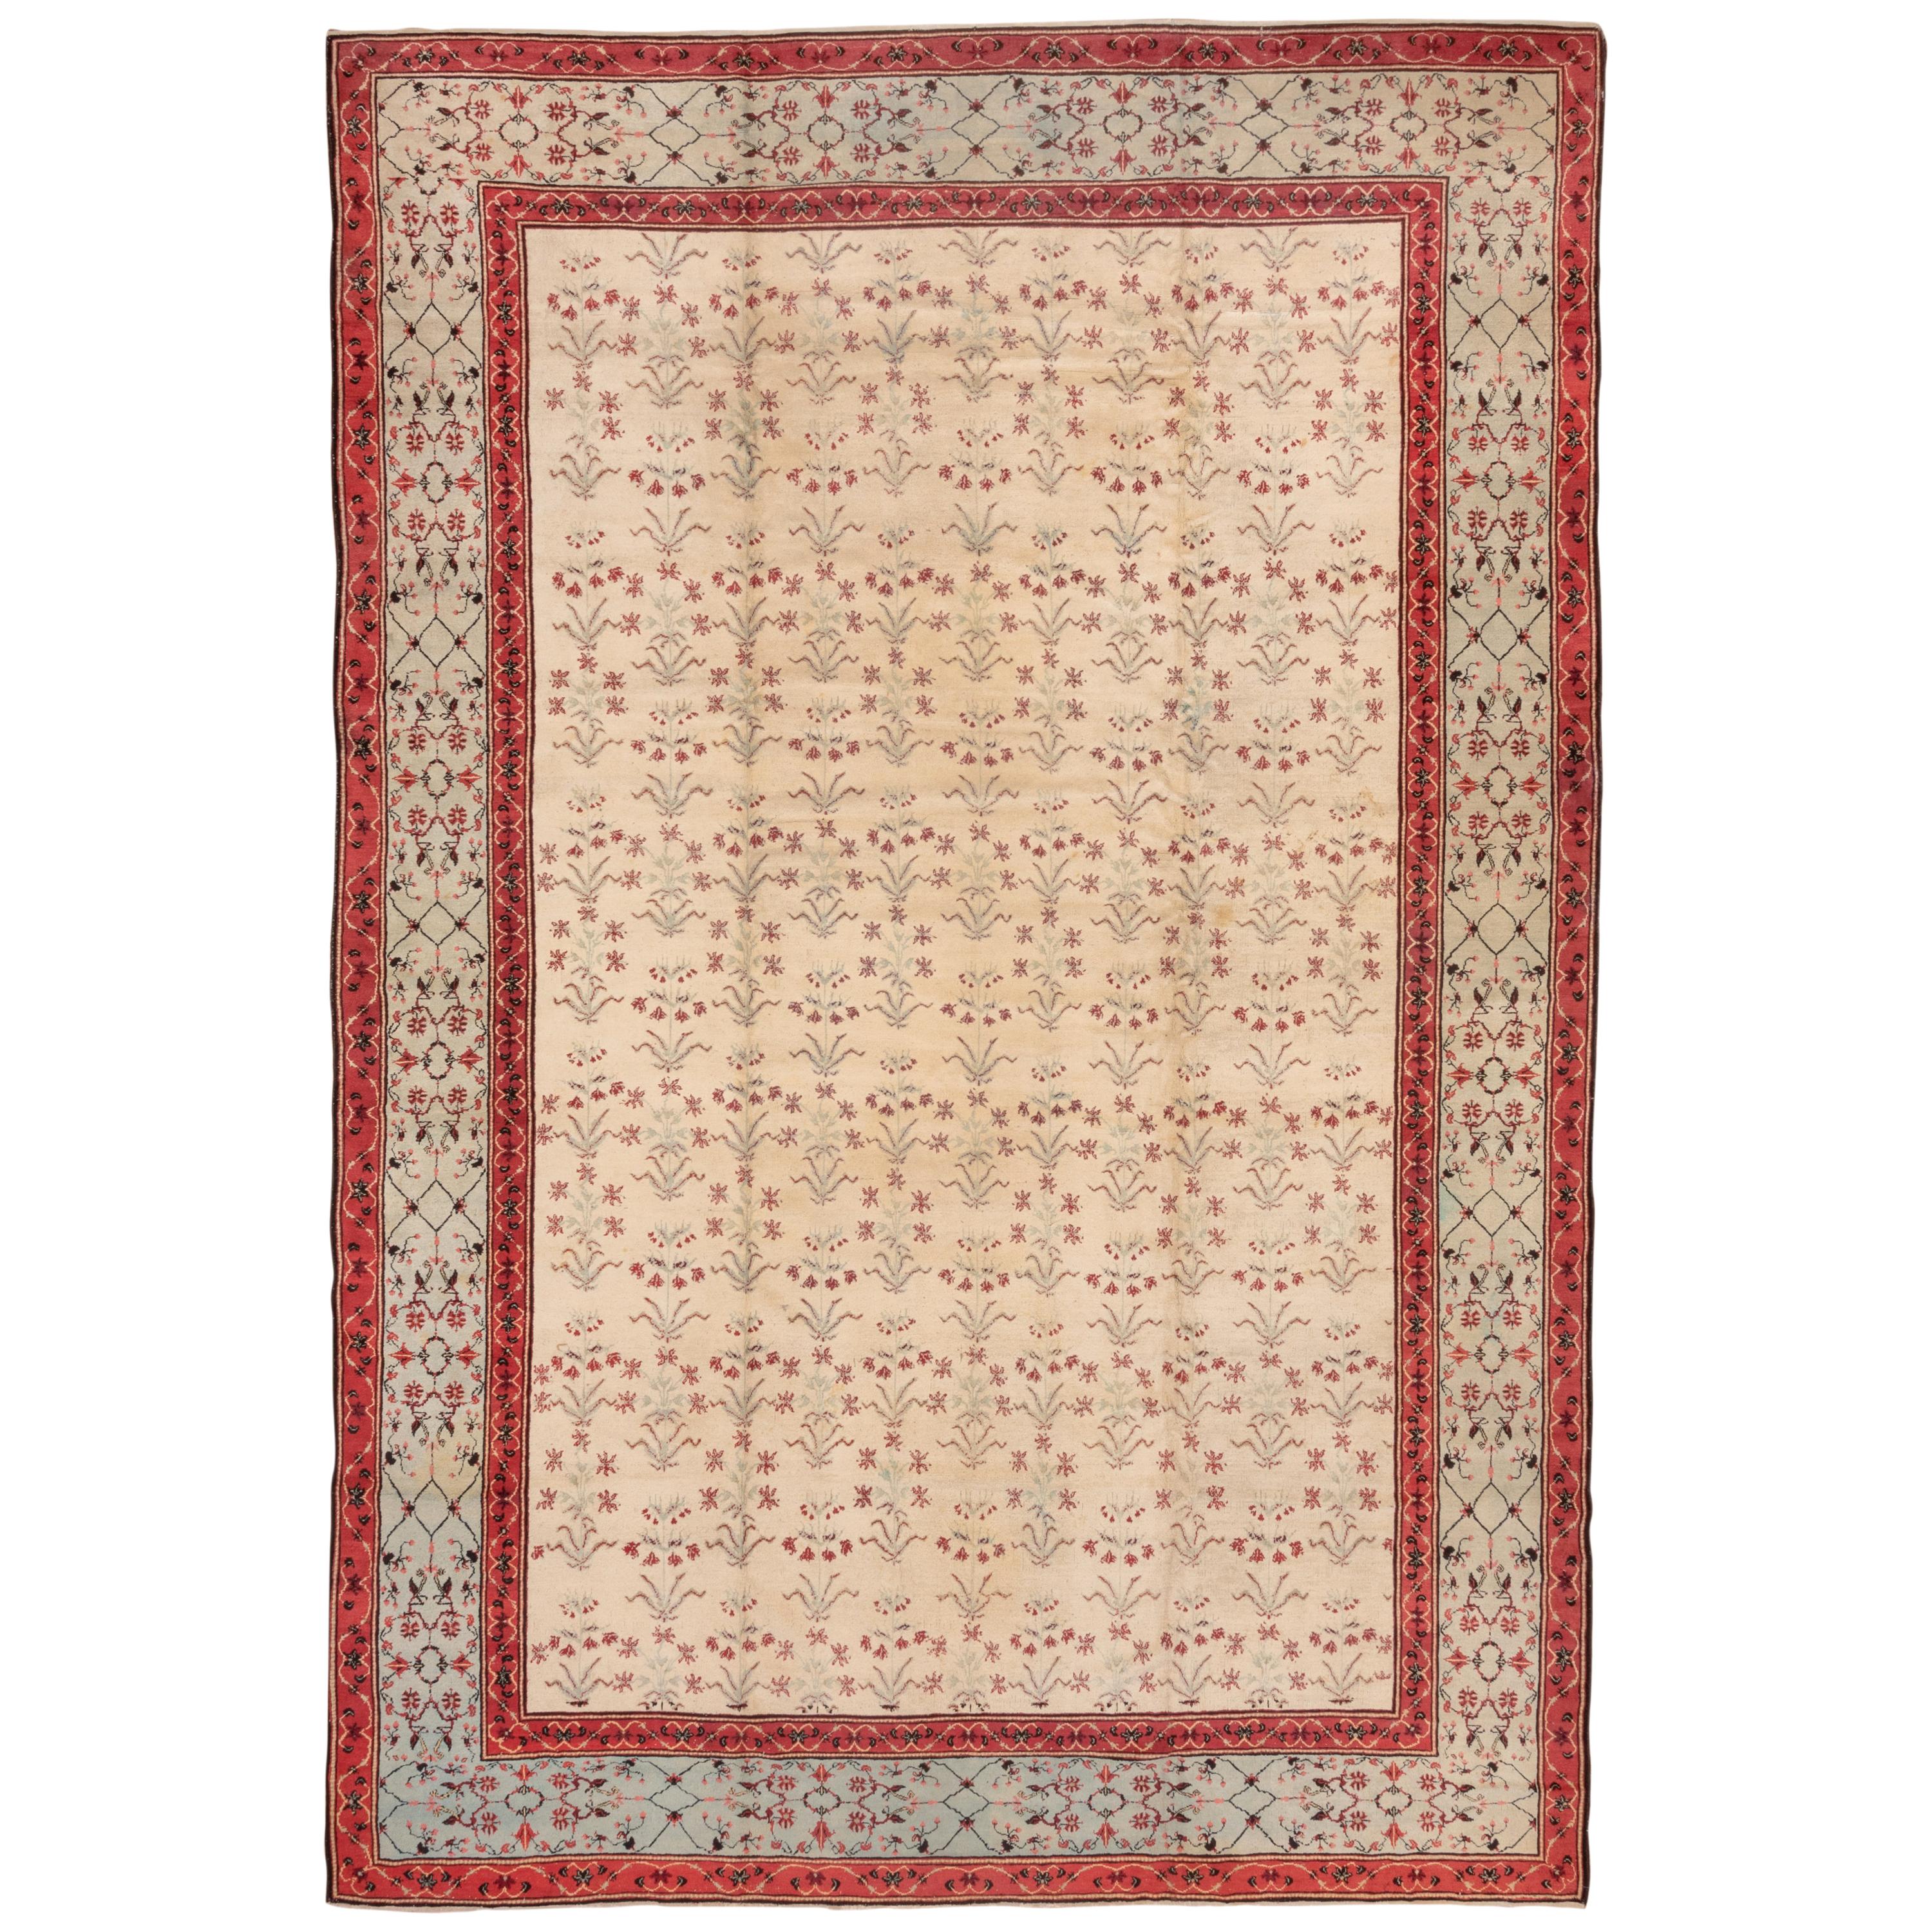 Antique Indian Agra Carpet, Ivory Field